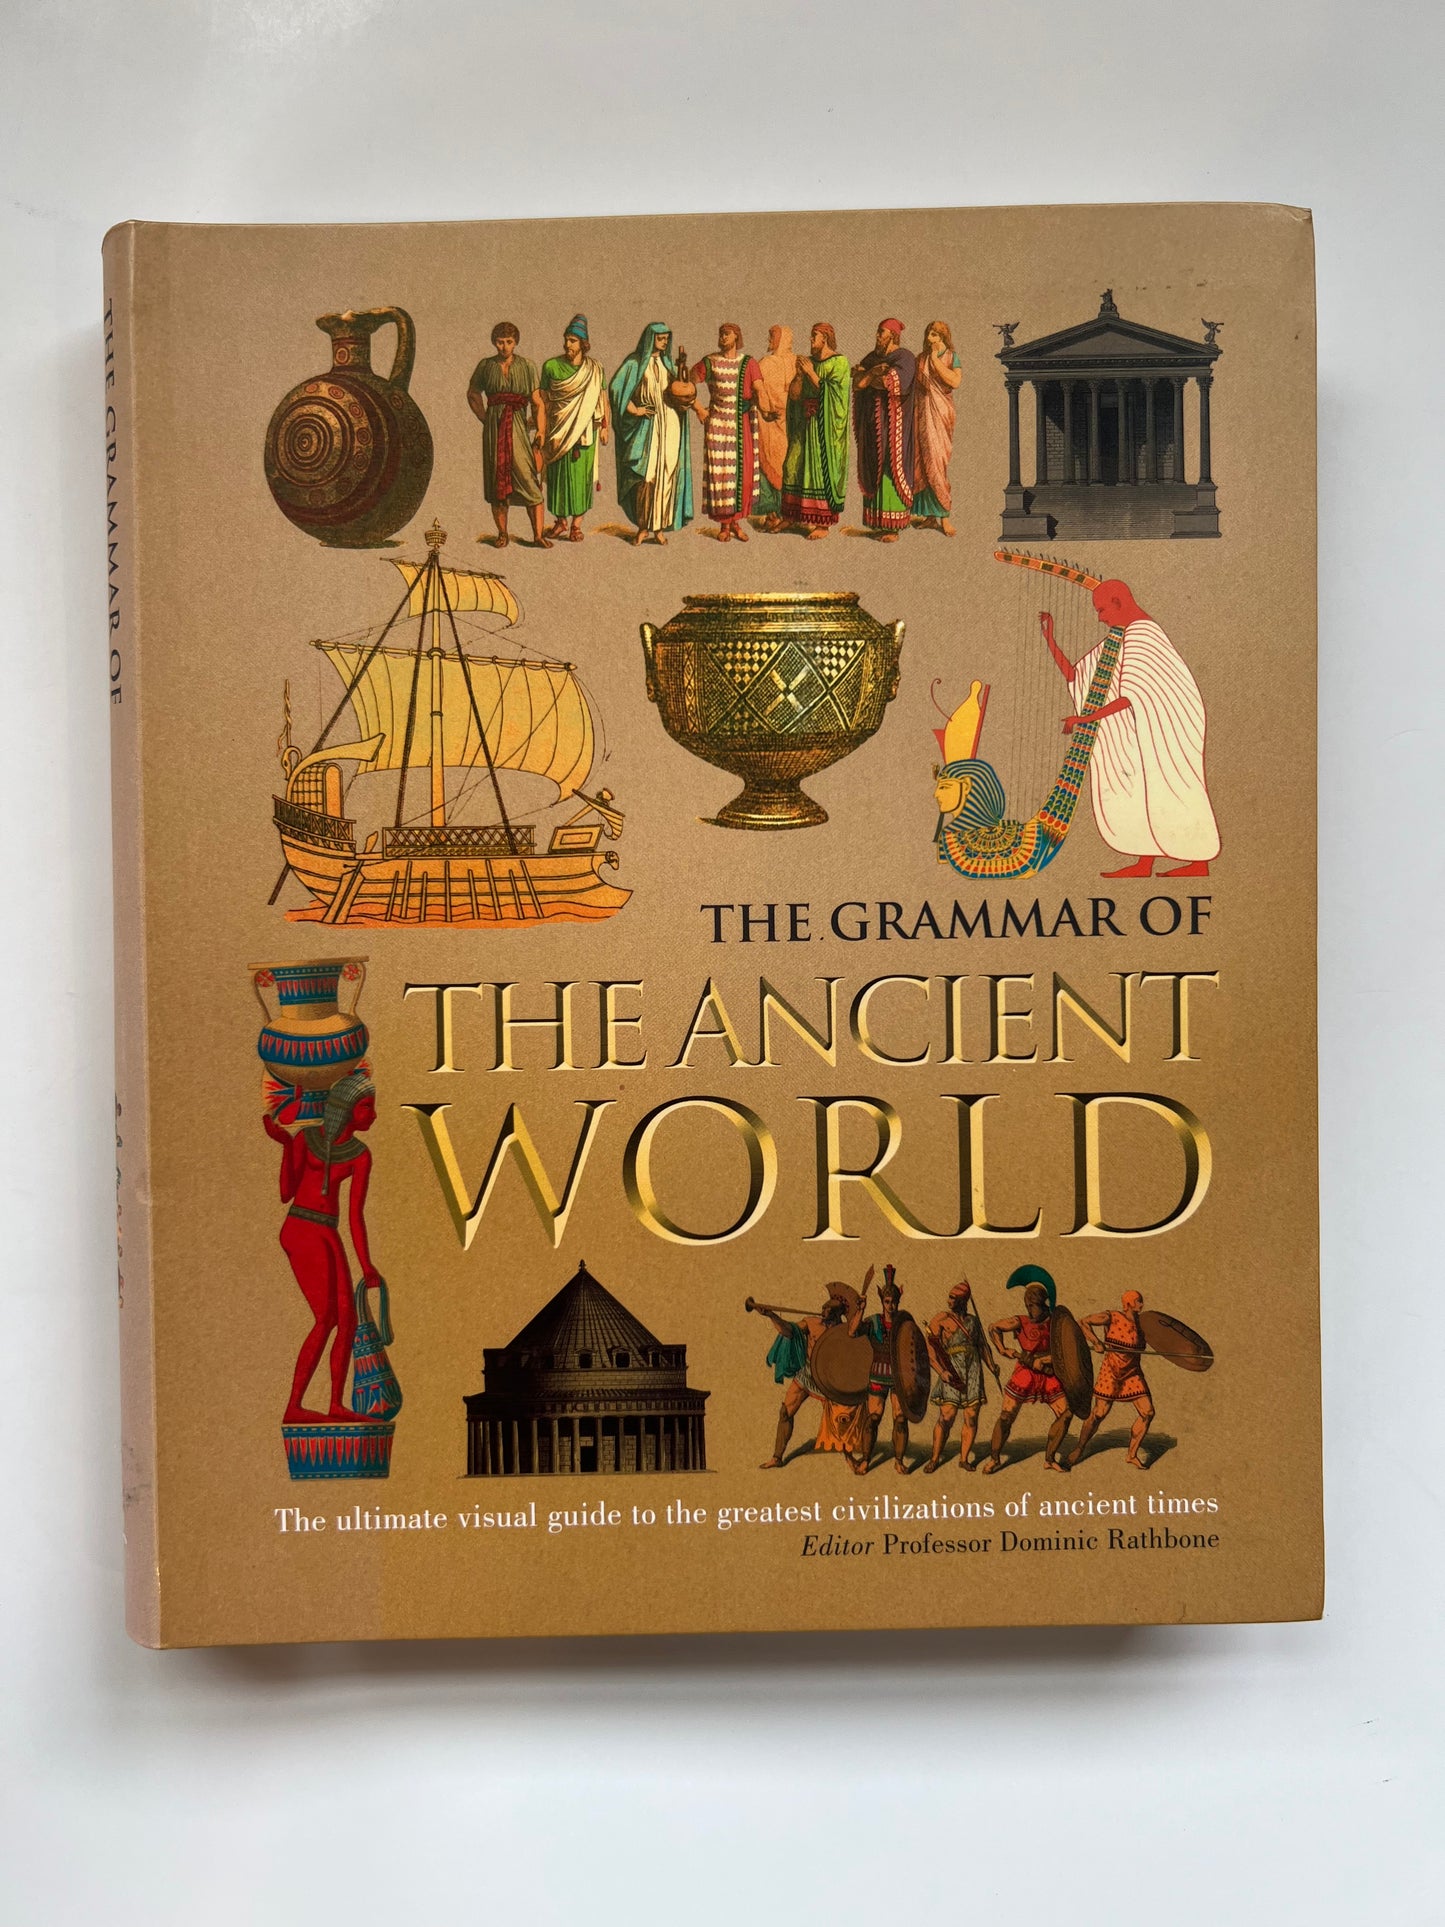 The Grammar of the Ancient World